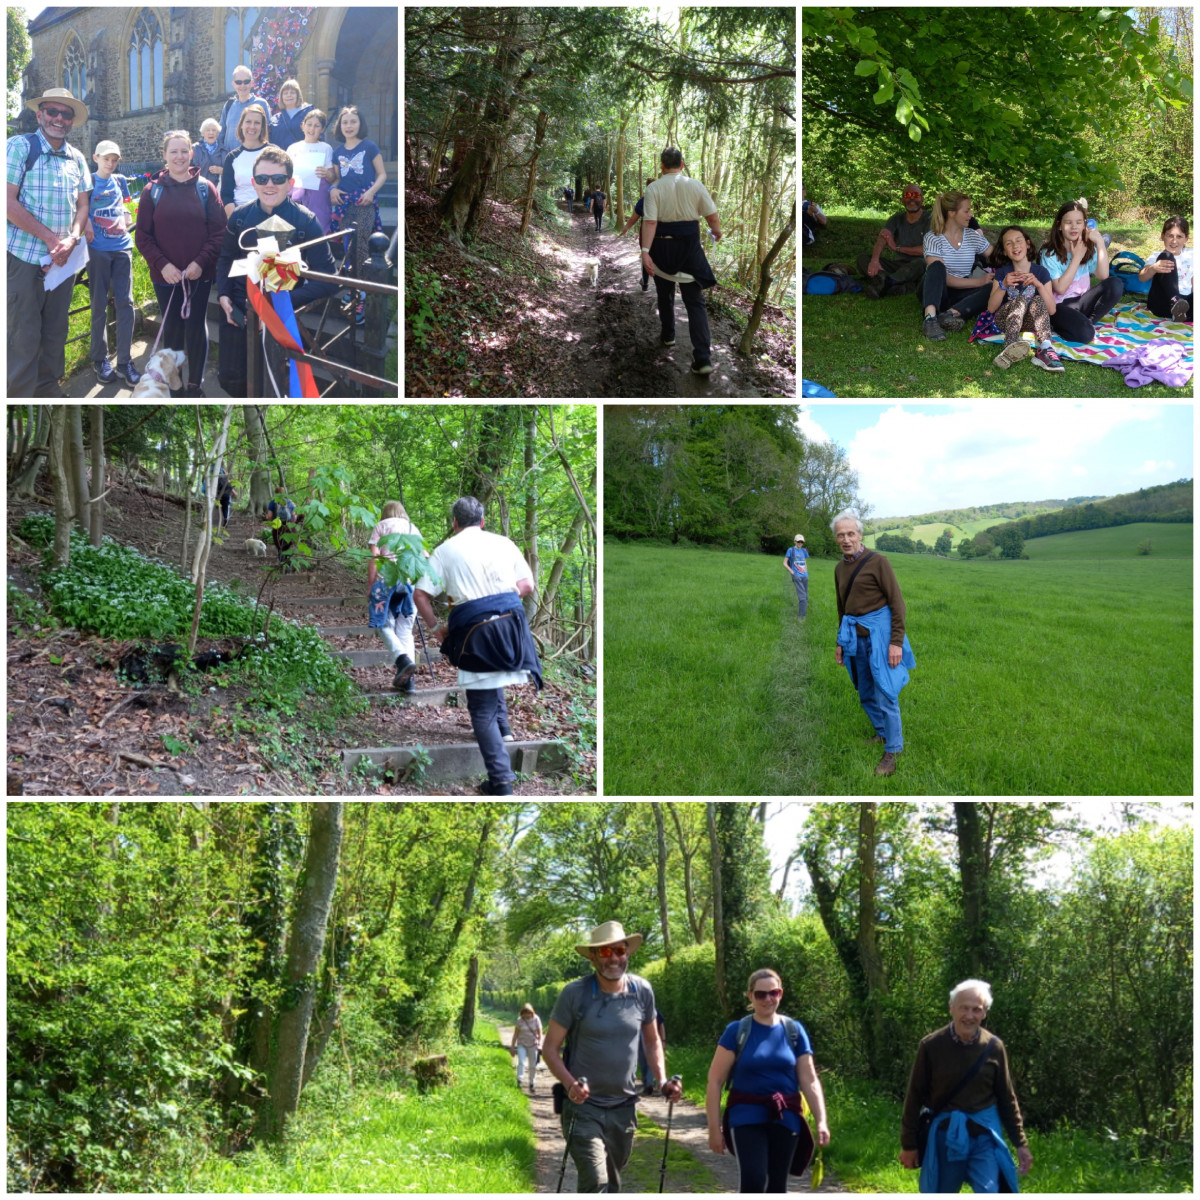 A collection of photos taken while 'beating the bounds' of St John's, Caterham.